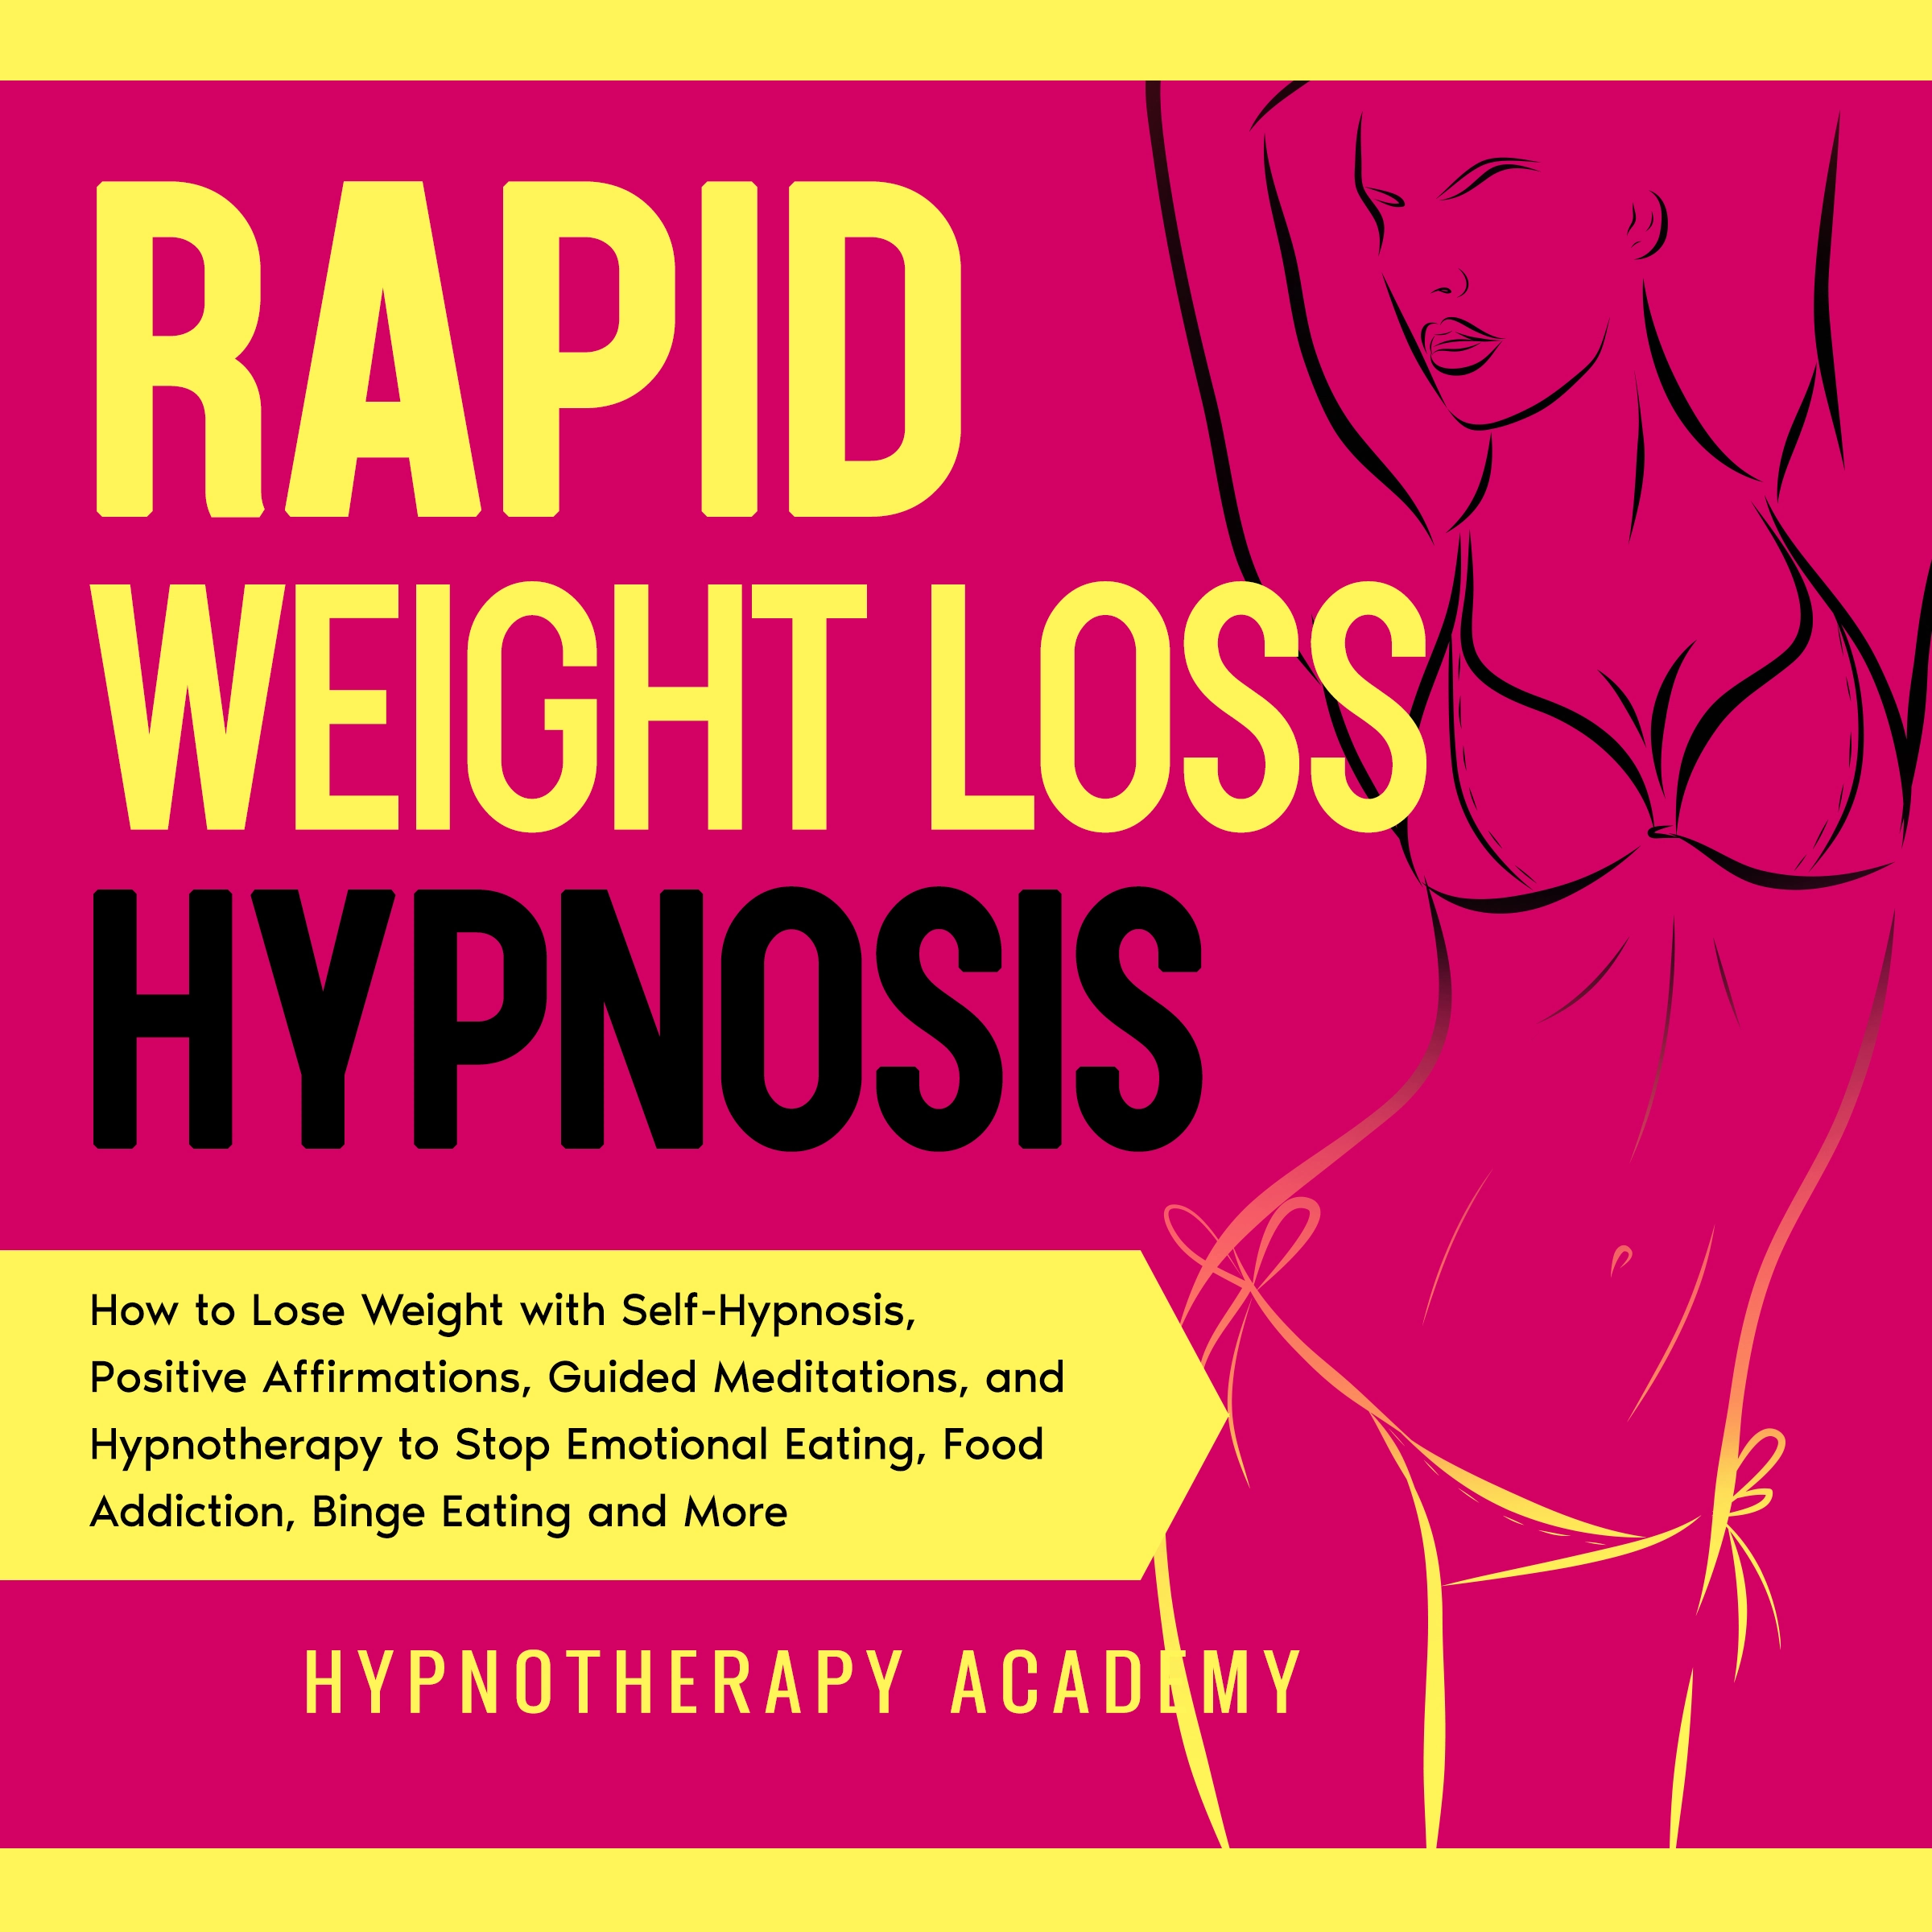 Rapid Weight Loss Hypnosis: How to Lose Weight with Self-Hypnosis, Positive Affirmations, Guided Meditations, and Hypnotherapy to Stop Emotional Eating, Food Addiction, Binge Eating and More Audiobook by Hypnotherapy Academy